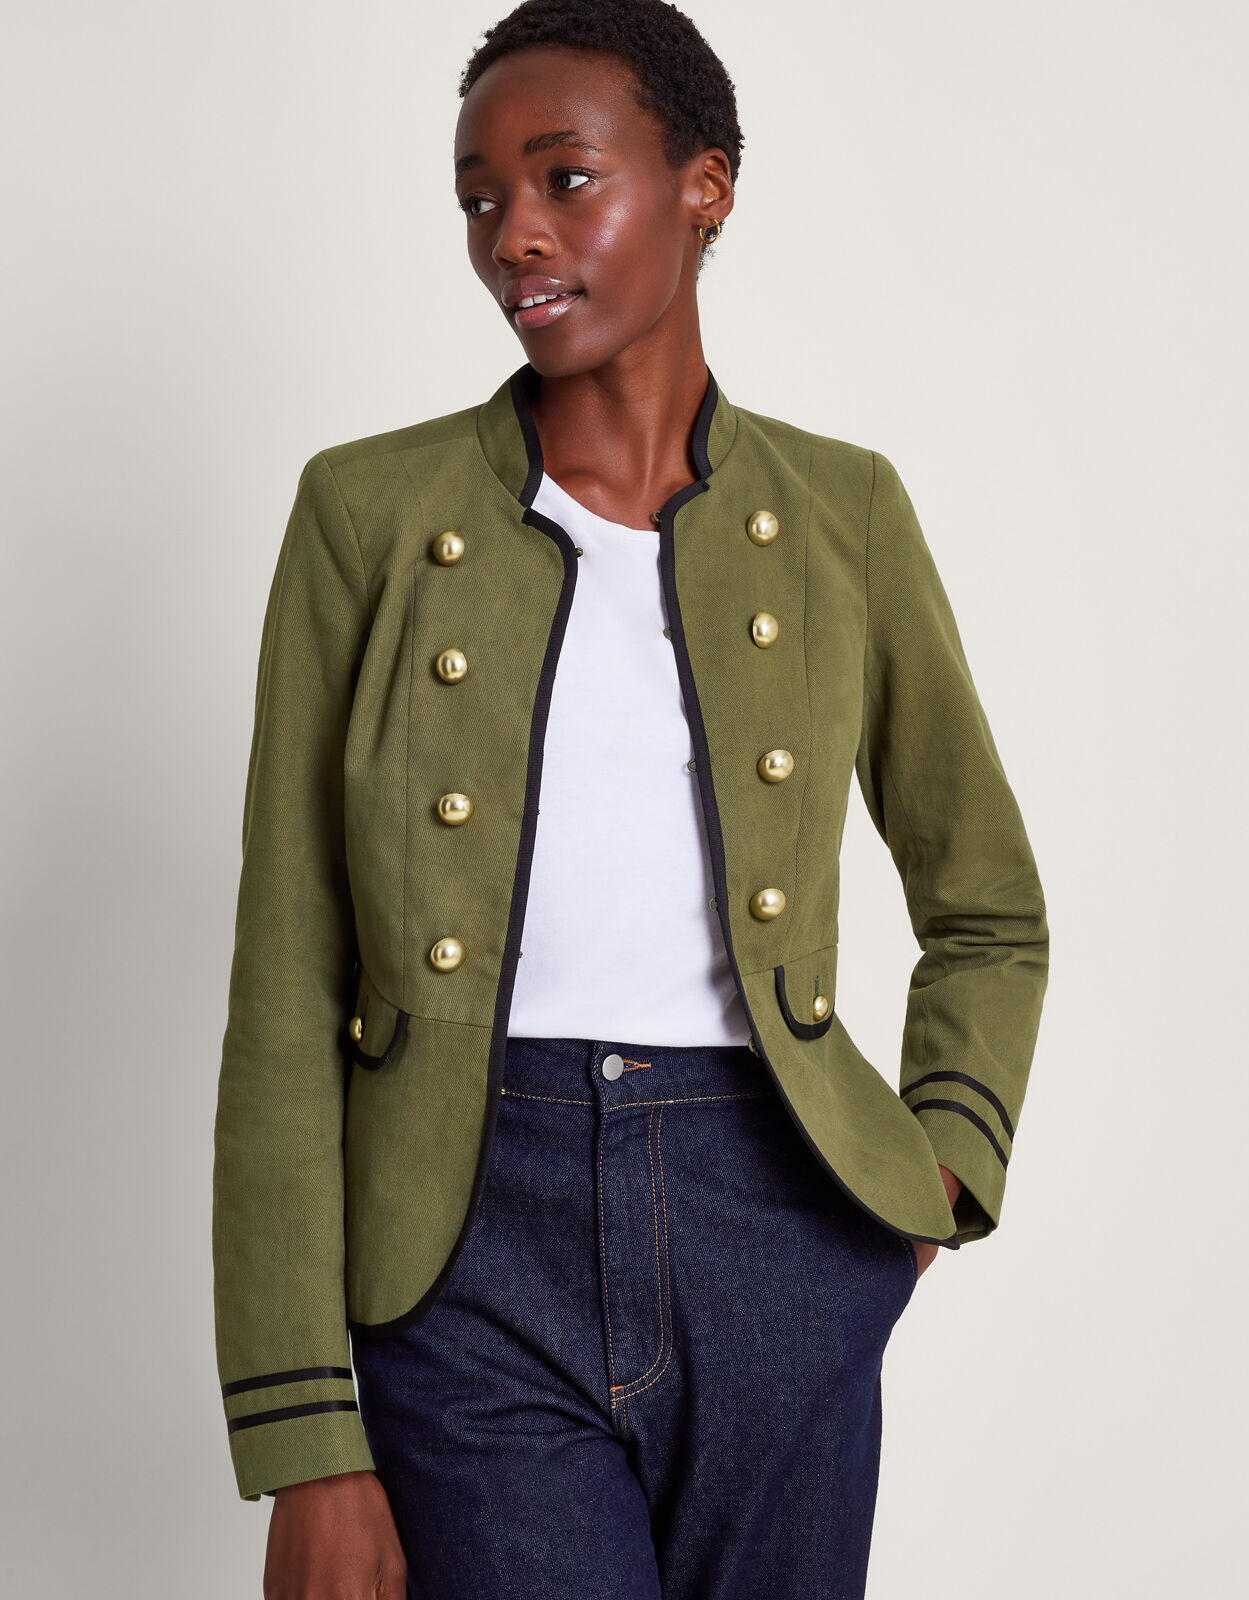 I Tried Zara's Most Expensive-Looking Spring Items and These 9 Are Game  Changers | Cotton coat women, Cotton jackets women, Patchwork jacket